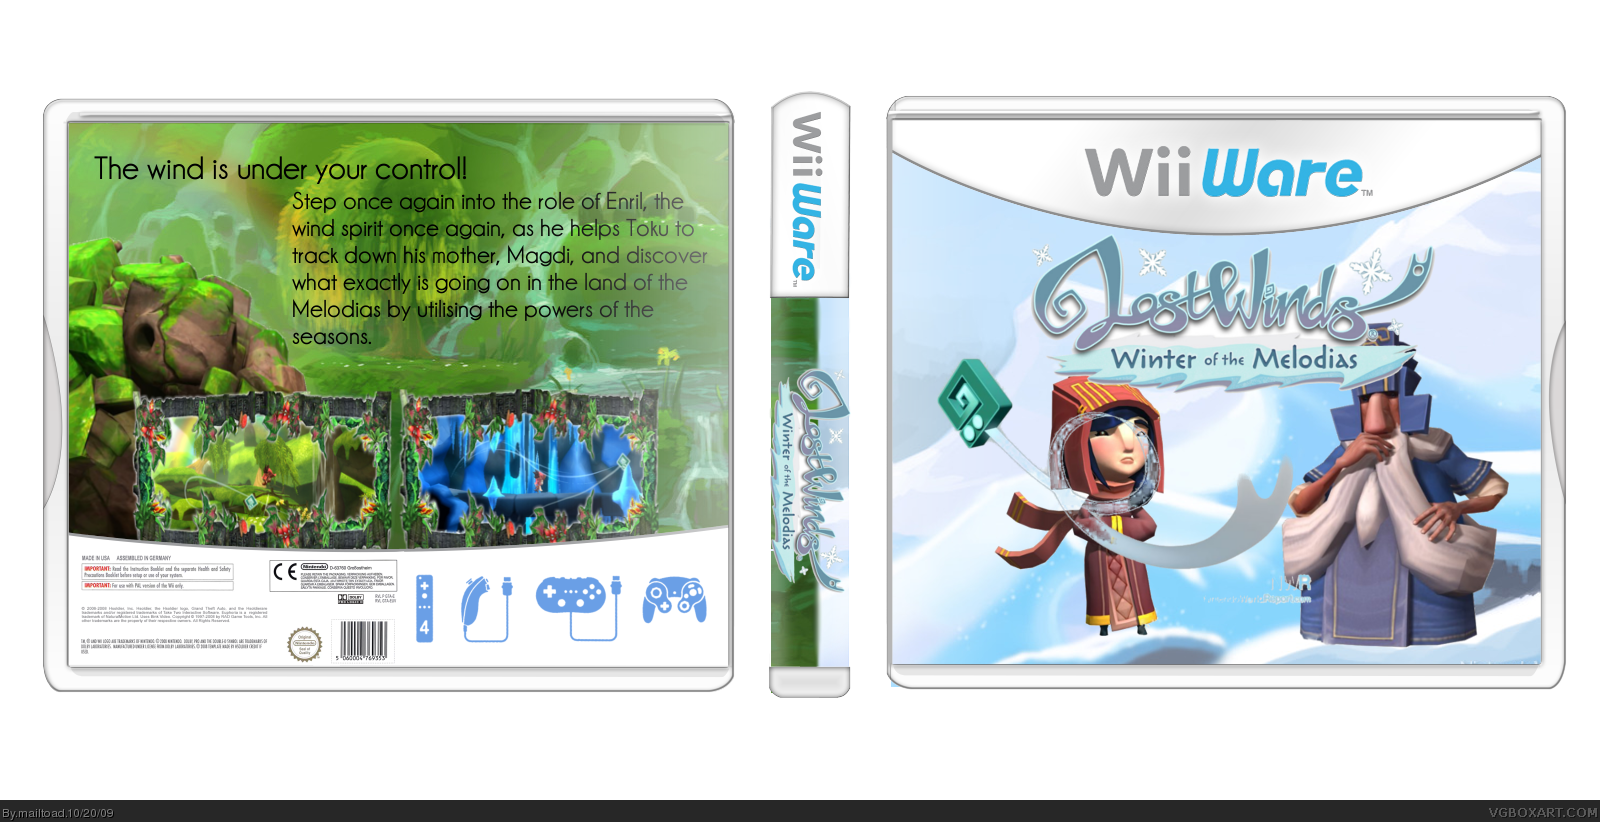 Lostwinds: Winter of the Melodias (WiiWare) box cover